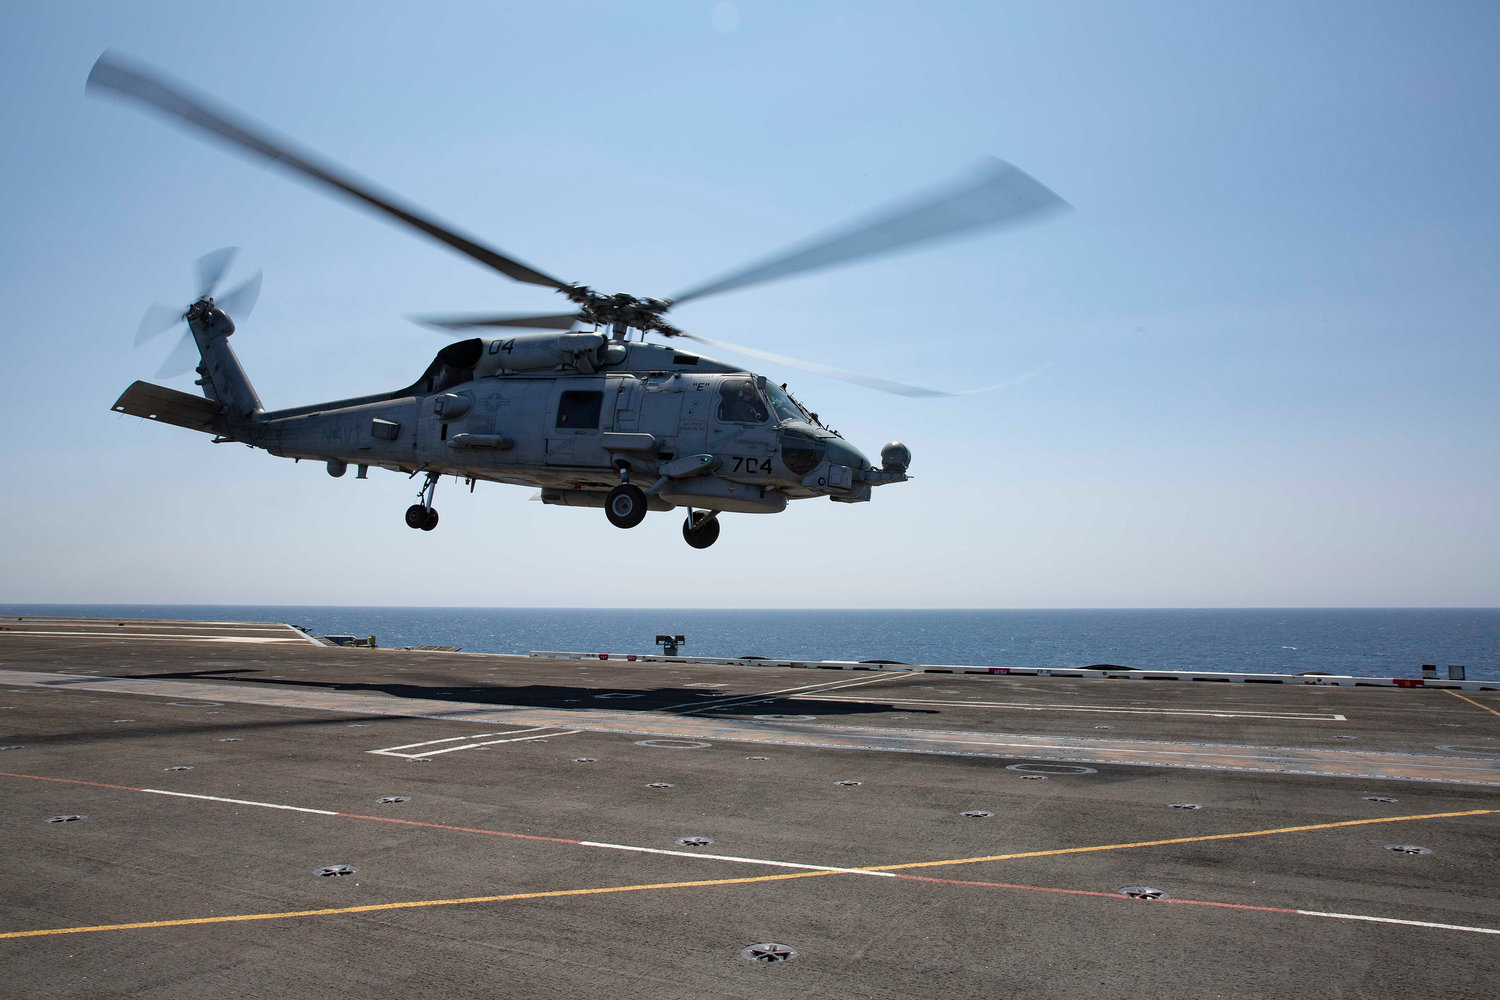 An MH-60R Sea Hawk helicopter takes off of the flight deck of the aircraft carrier USS Abraham Lincoln on Aug. 14, 2021.  A similar Navy helicopter operating from the ship crashed off the coast of San Diego on Aug. 31. (Mass Communication Specialist 2nd Class Amber Smalley/U.S. Navy/TNS)